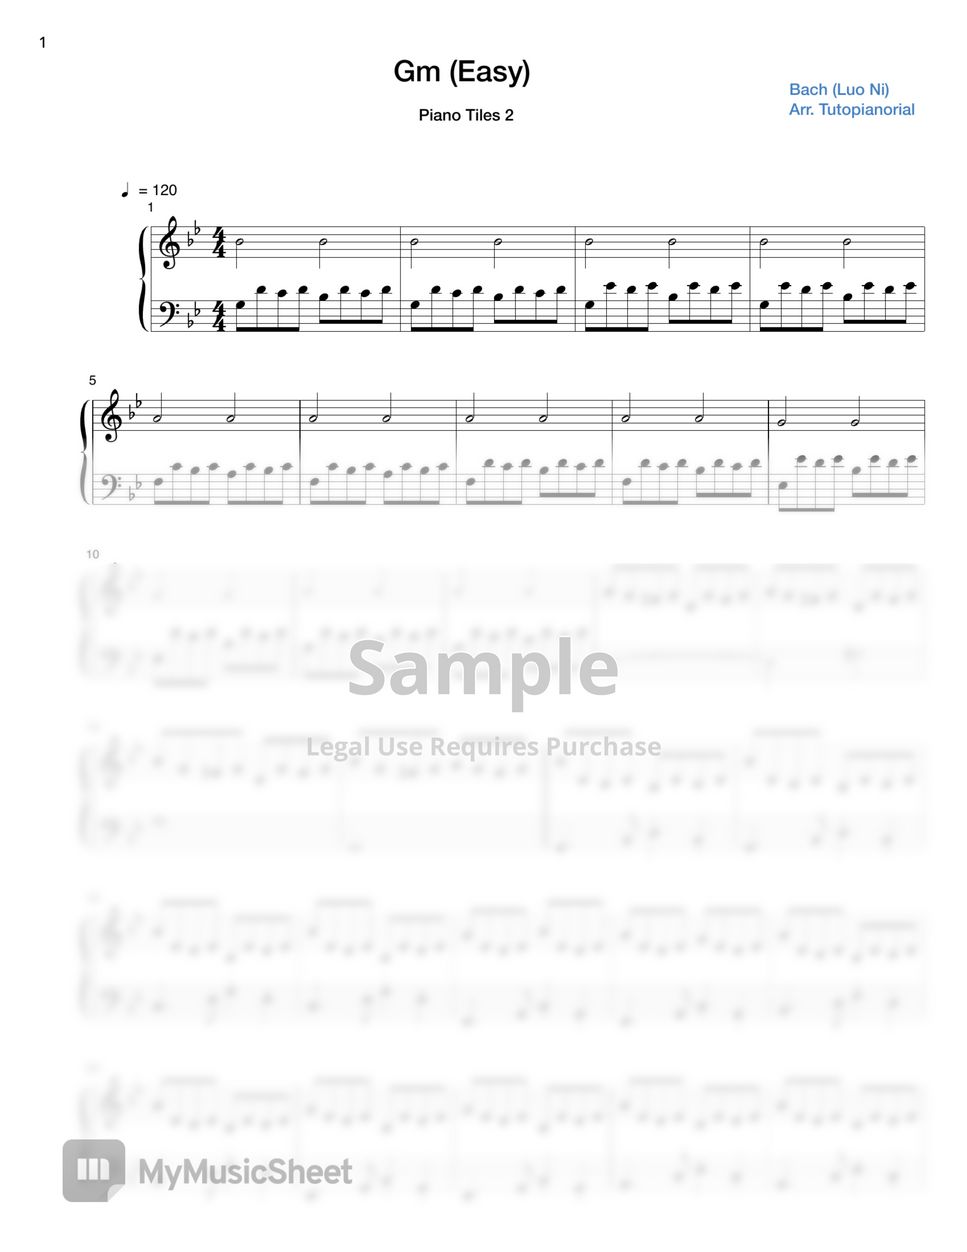 Bach - Gm (piano tiles 2) (EASY) by Tutopianorial